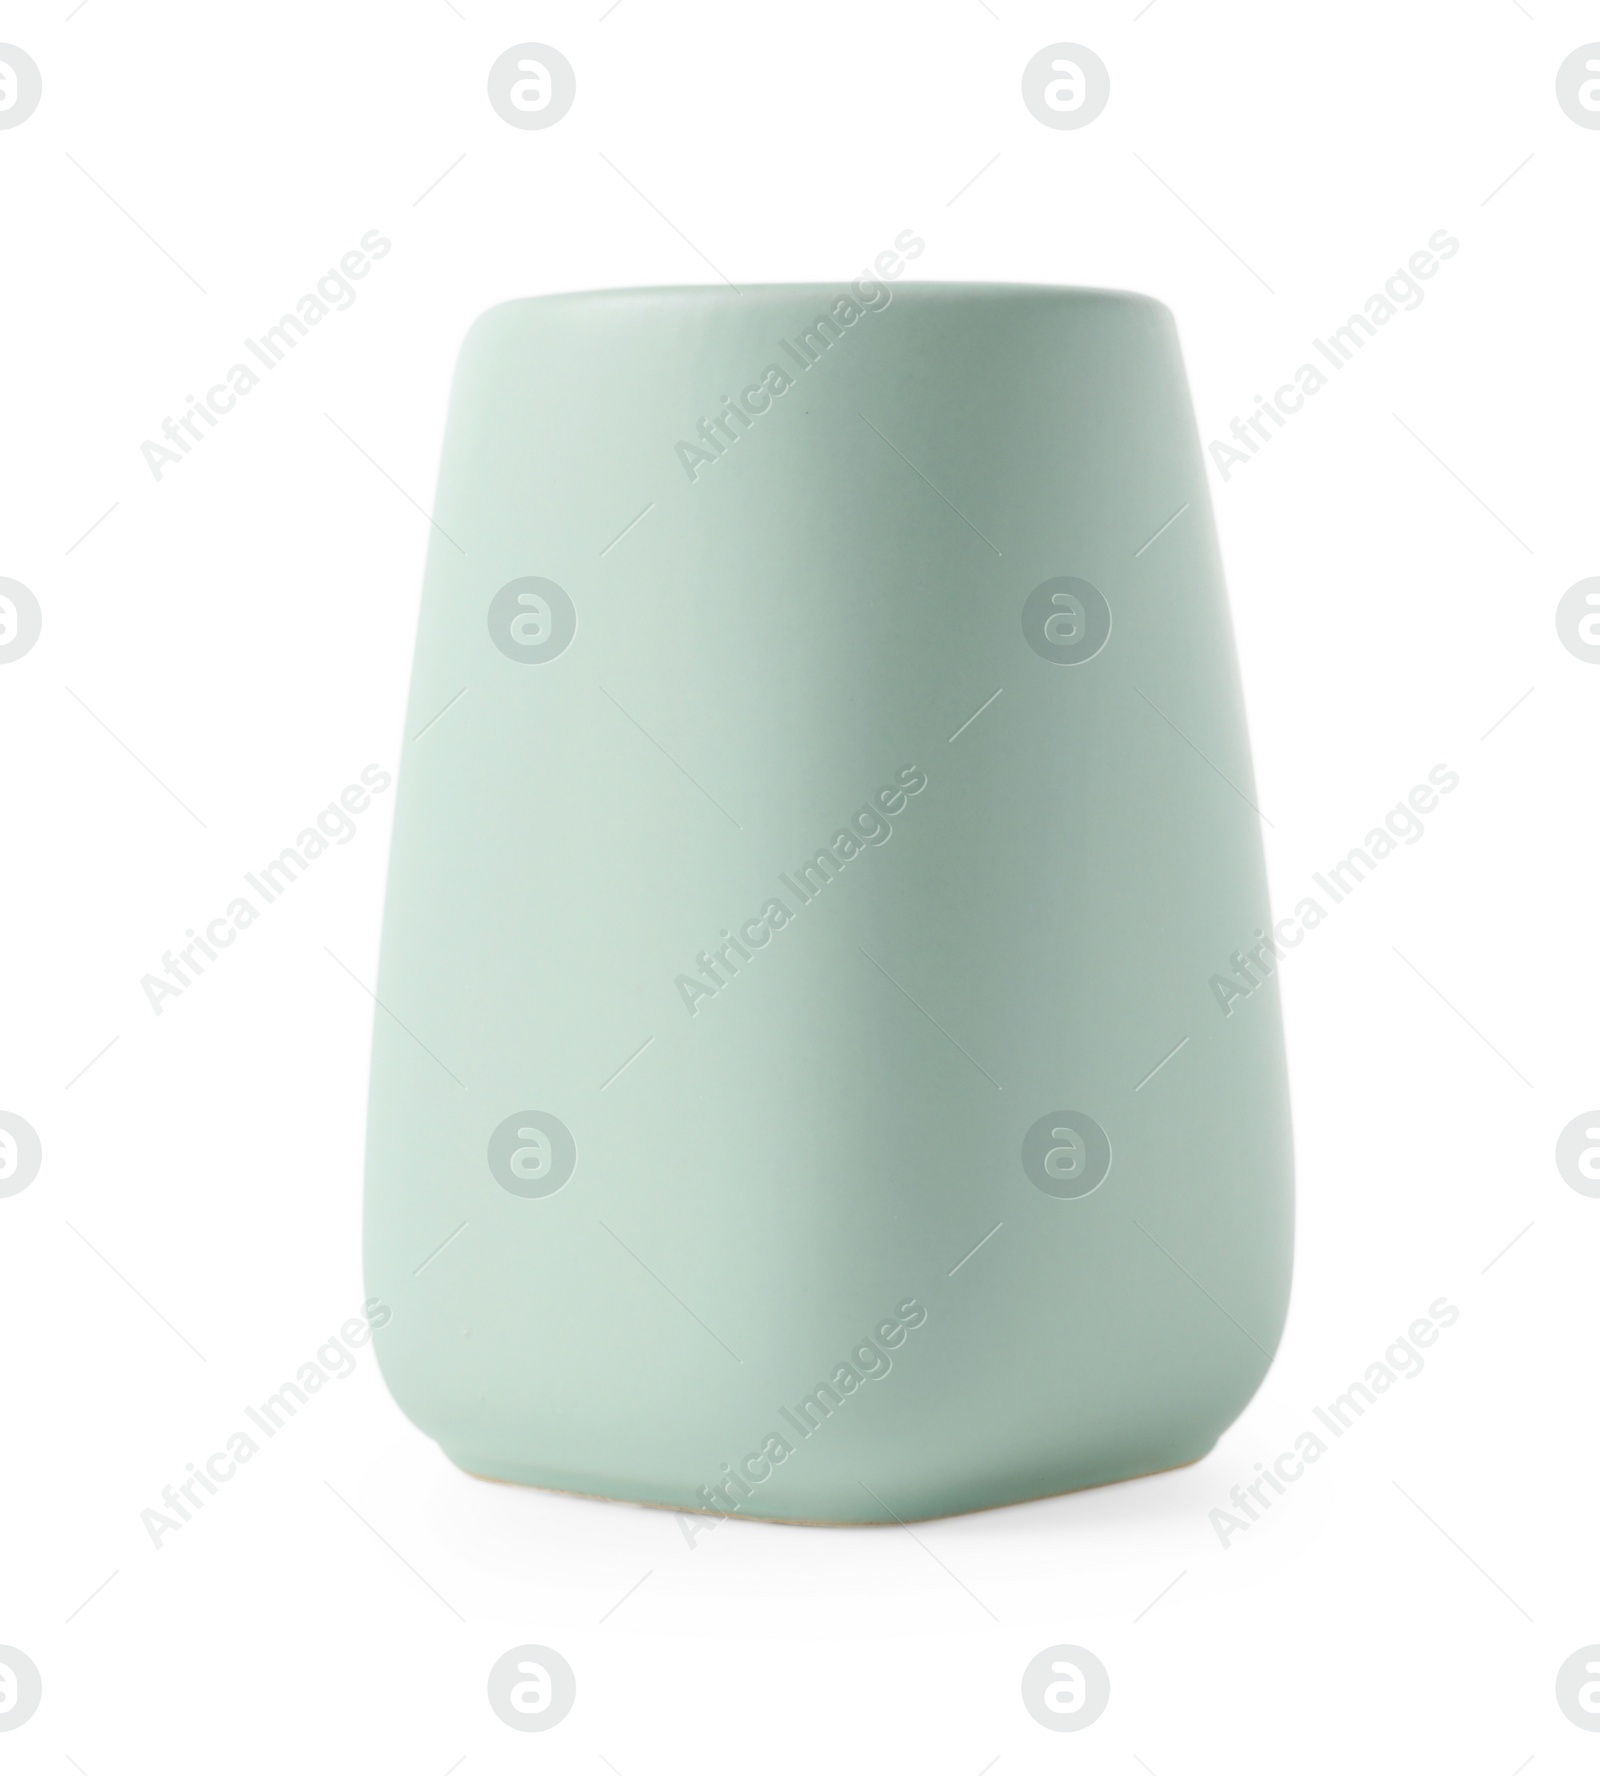 Photo of Bath accessory. Light green ceramic toothbrush holder isolated on white